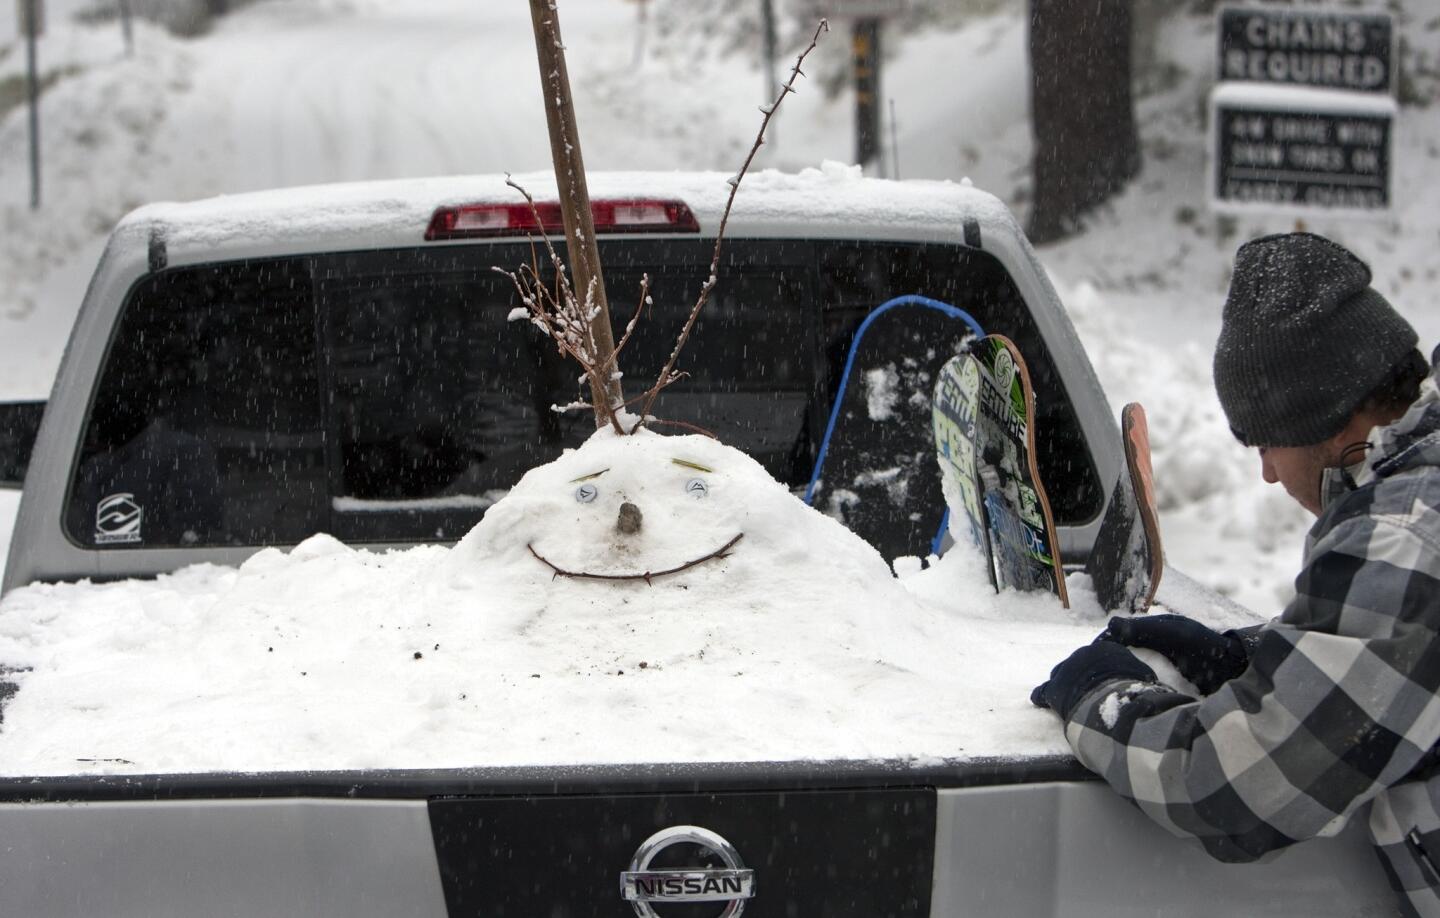 Sebastian Perez of Rancho Cucamonga puts the finishing touches on a snowman face in the back of his pickup truck.